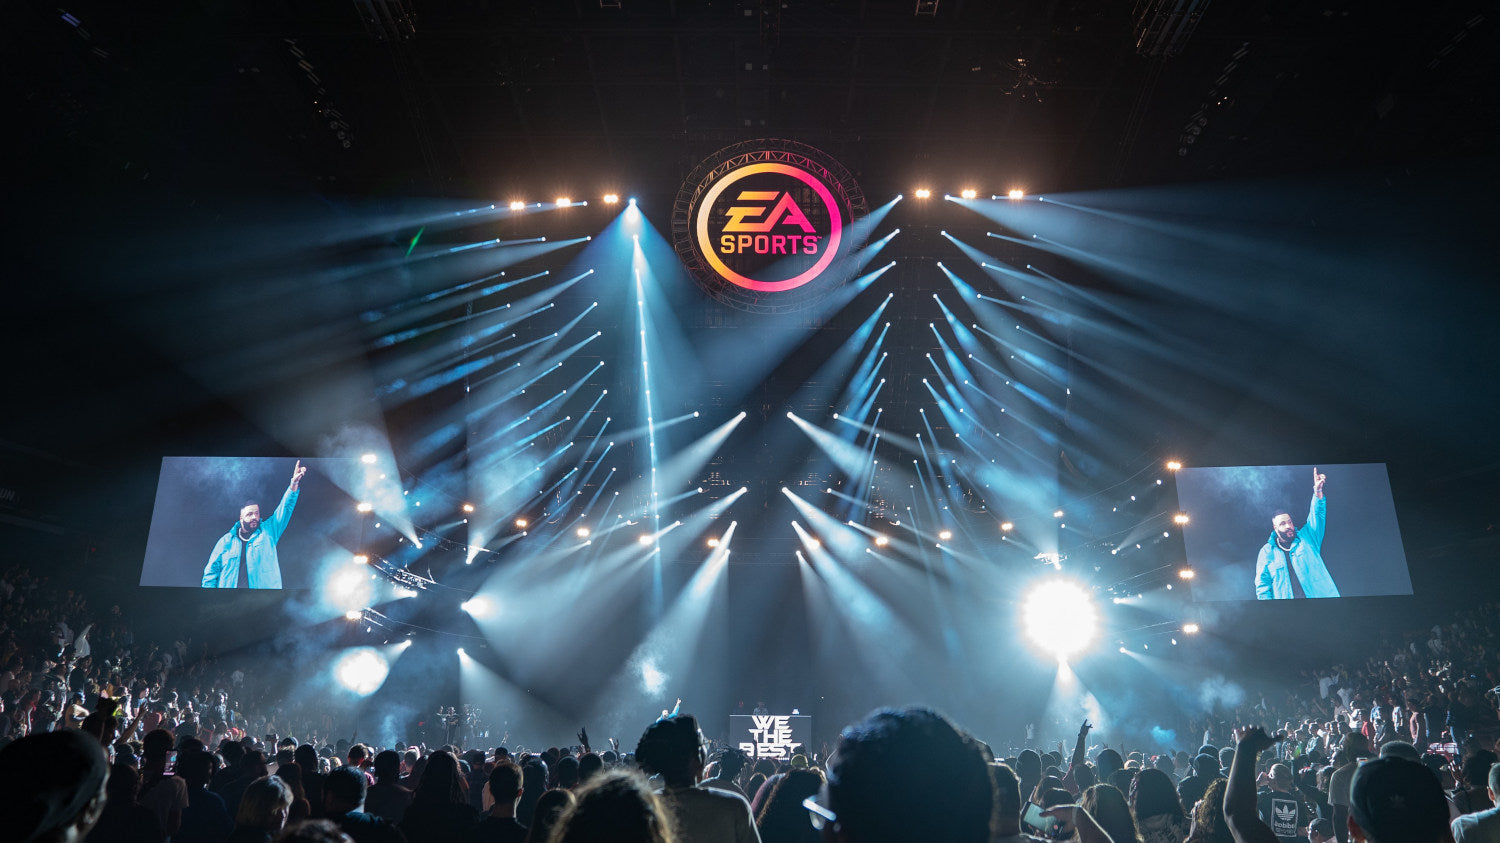 ea sports esports event at an arena